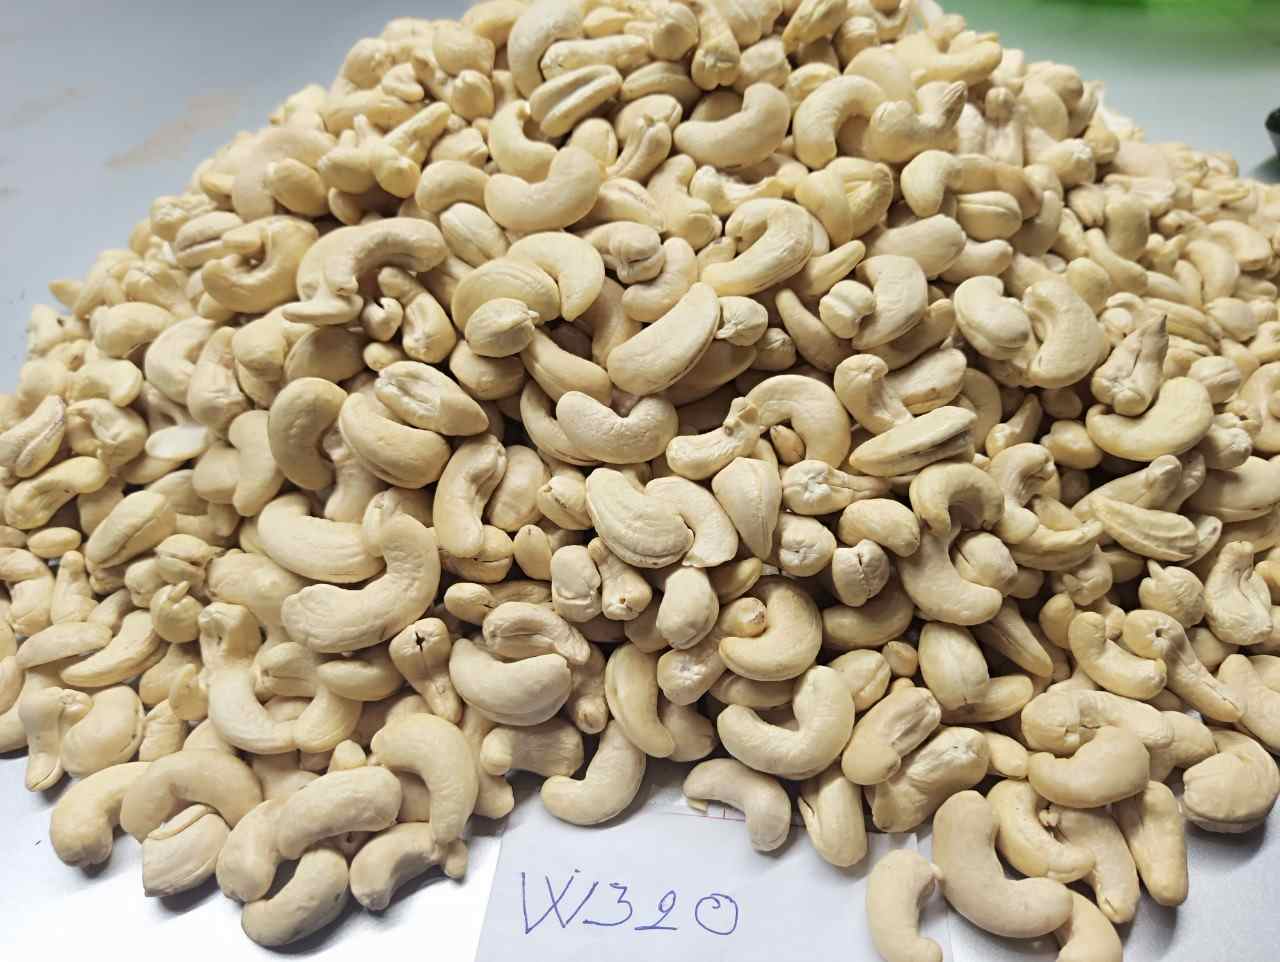 Raw Image Of W320 Cashew Nuts From Our Cashew Factory In Binh Phuoc, Vietnam